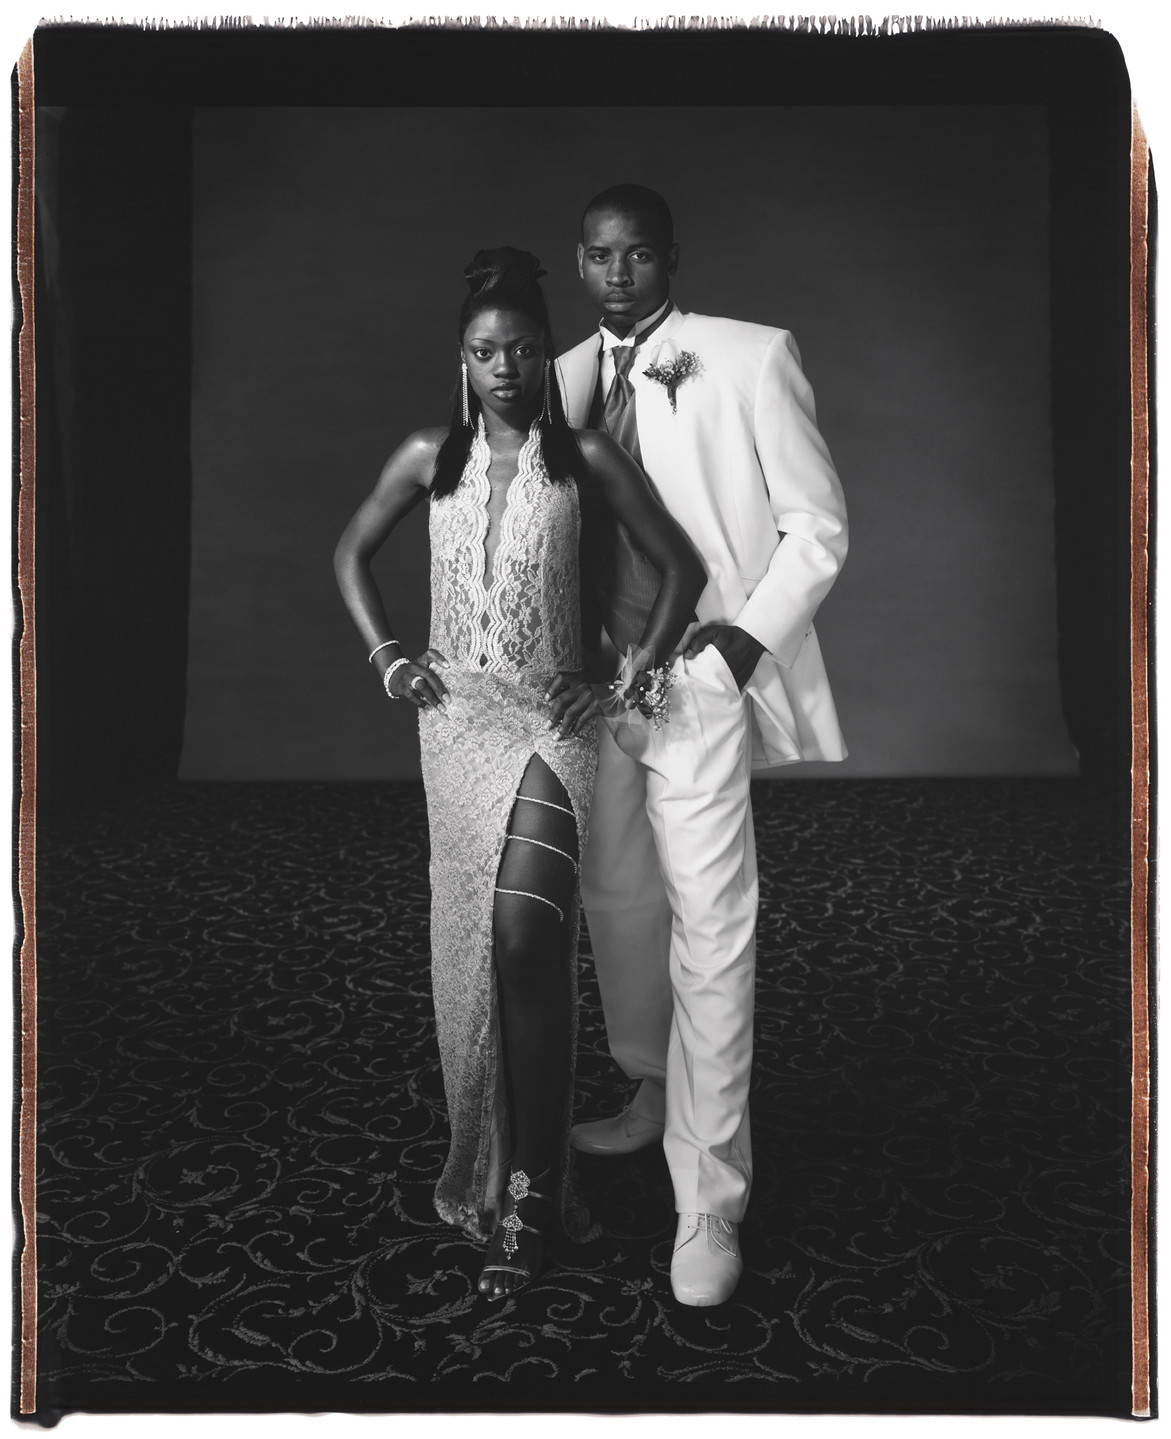 A black and white photograph of a teenage couple in formal clothing. A teen girl with dark skin and straight, dark hair stands slightly in front of a teen boy with dark skin and shortly cropped dark hair. She wears a long, light colored lace dress with a slit on the leg, and a jeweled chain wrapped around her thigh. He wears a white suit with a dark tie.